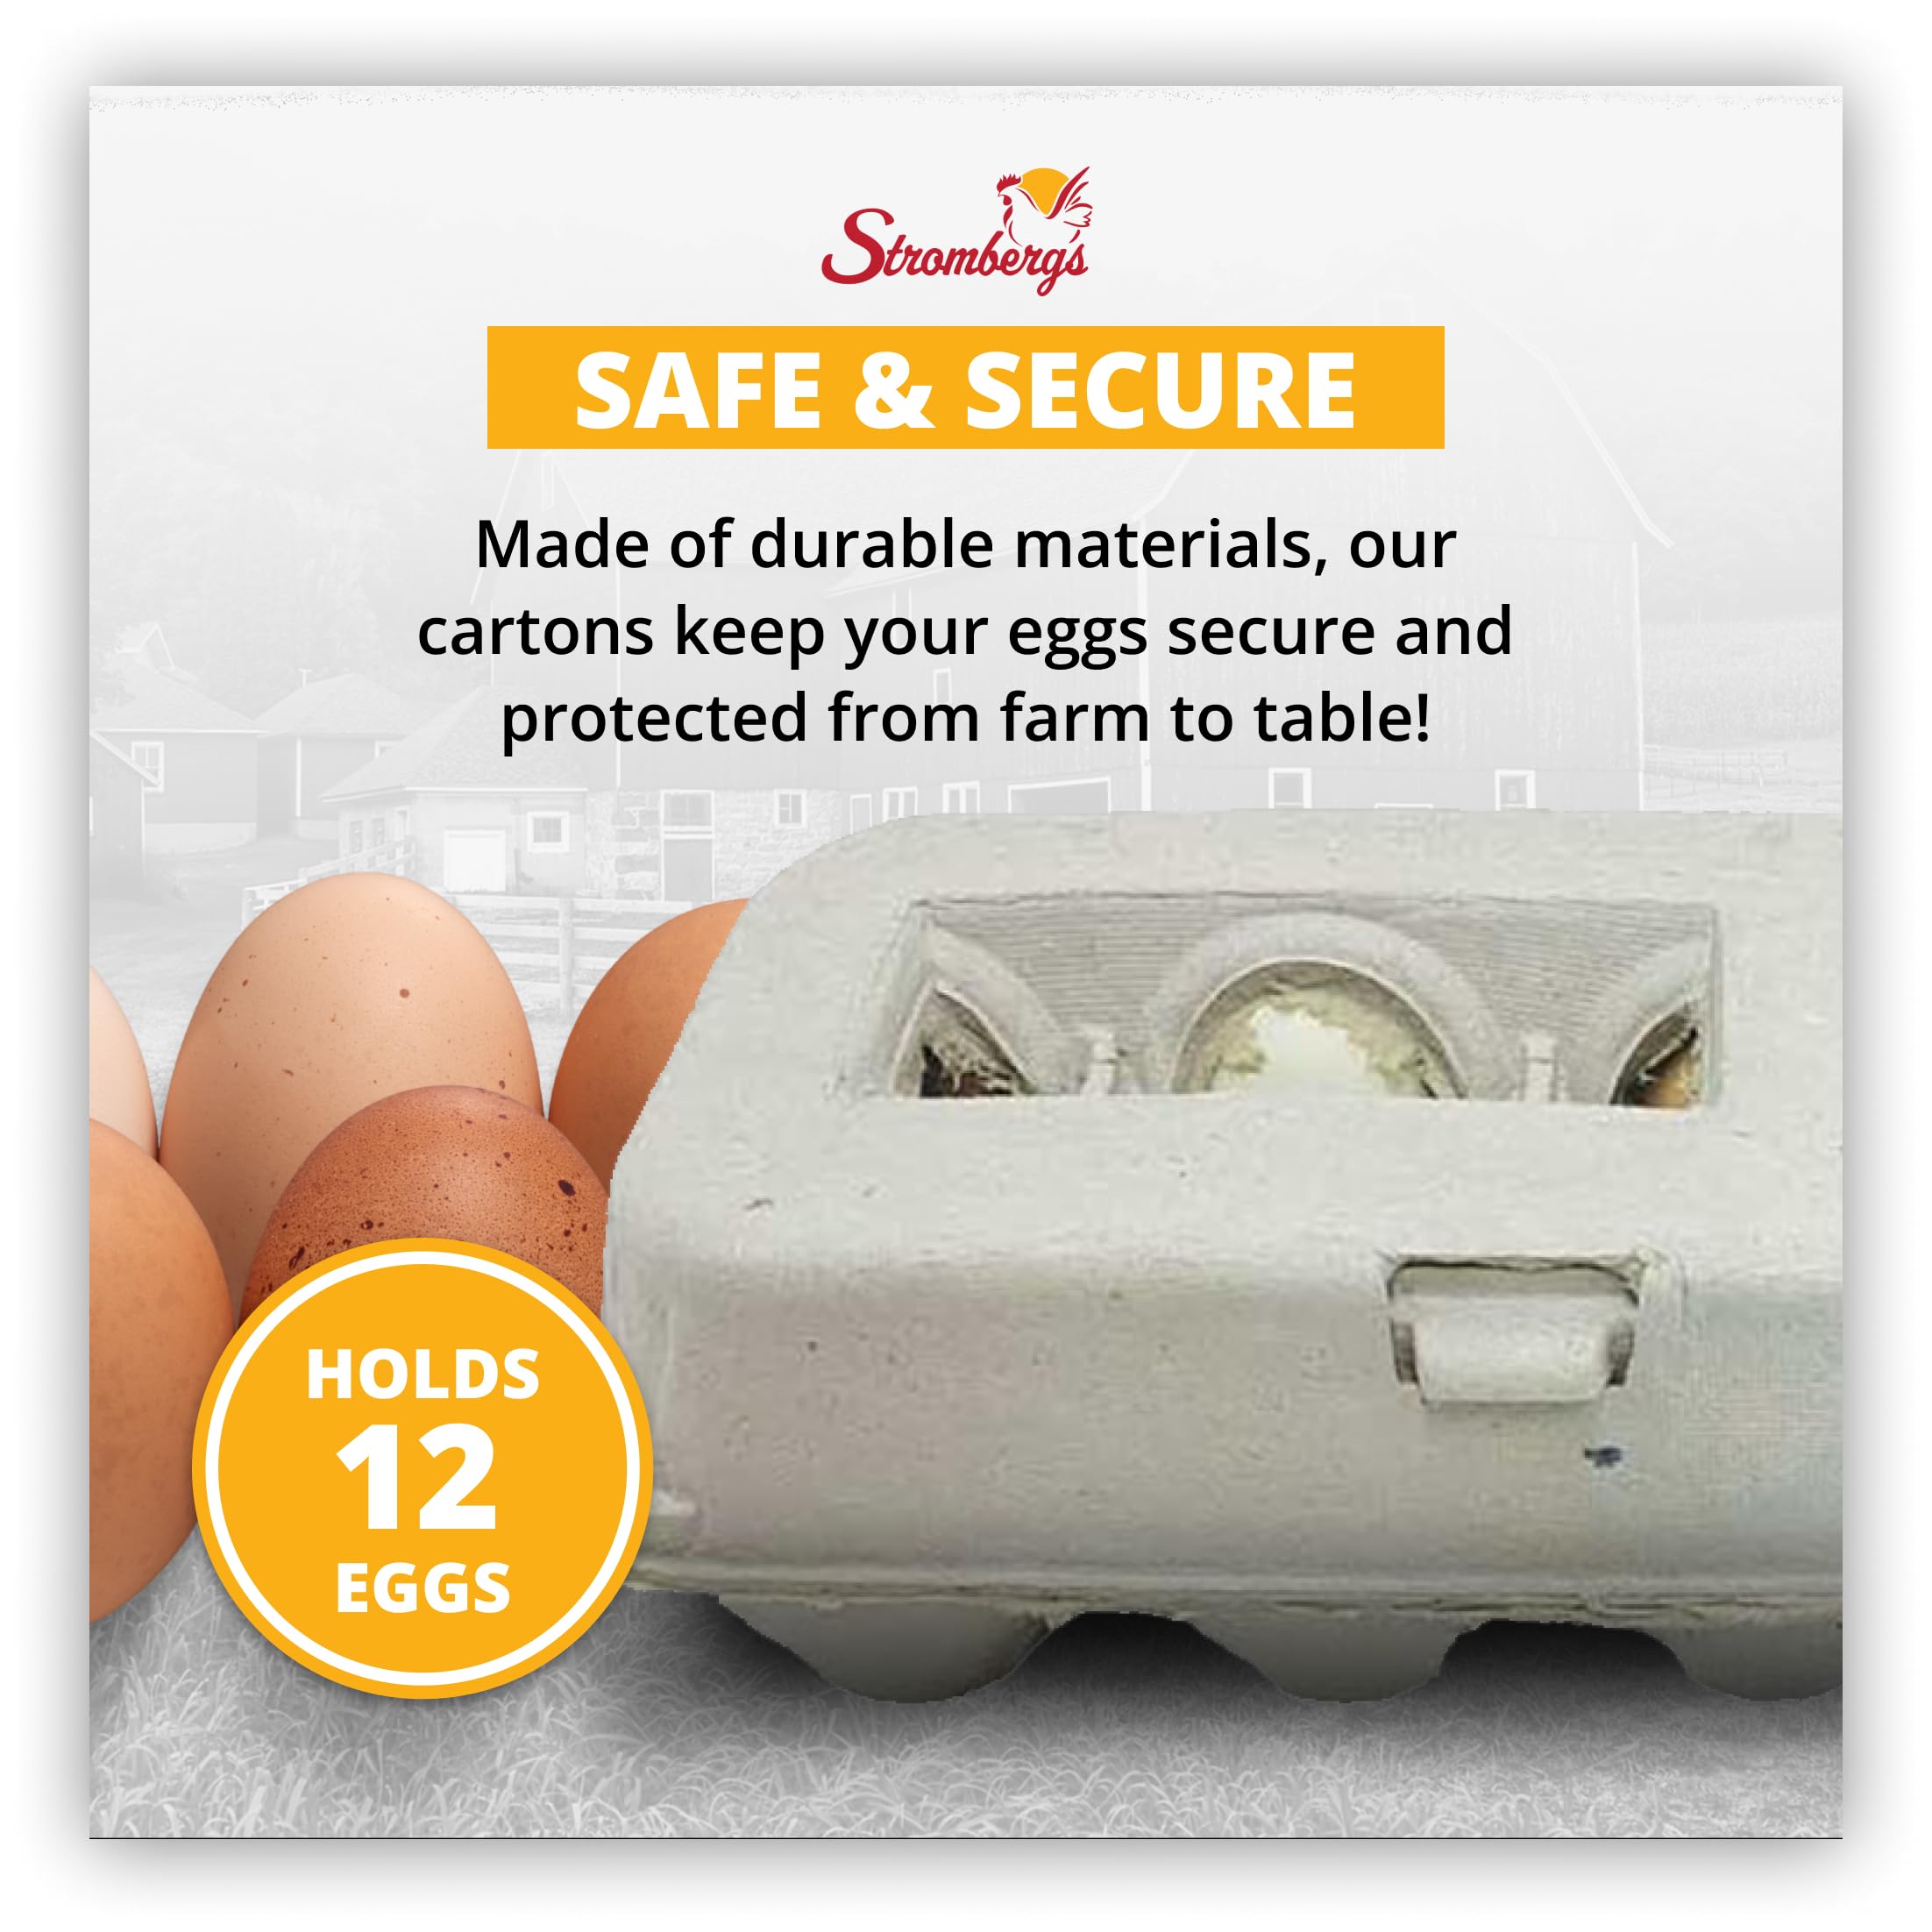 Stromberg's Large Blank Egg Cartons, Bulk Pack for Large Eggs, Perfect for Custom Branding, Safe & Secure Egg Storage, Convenient Stacking for Easy Transport and Storage, 250 Pack